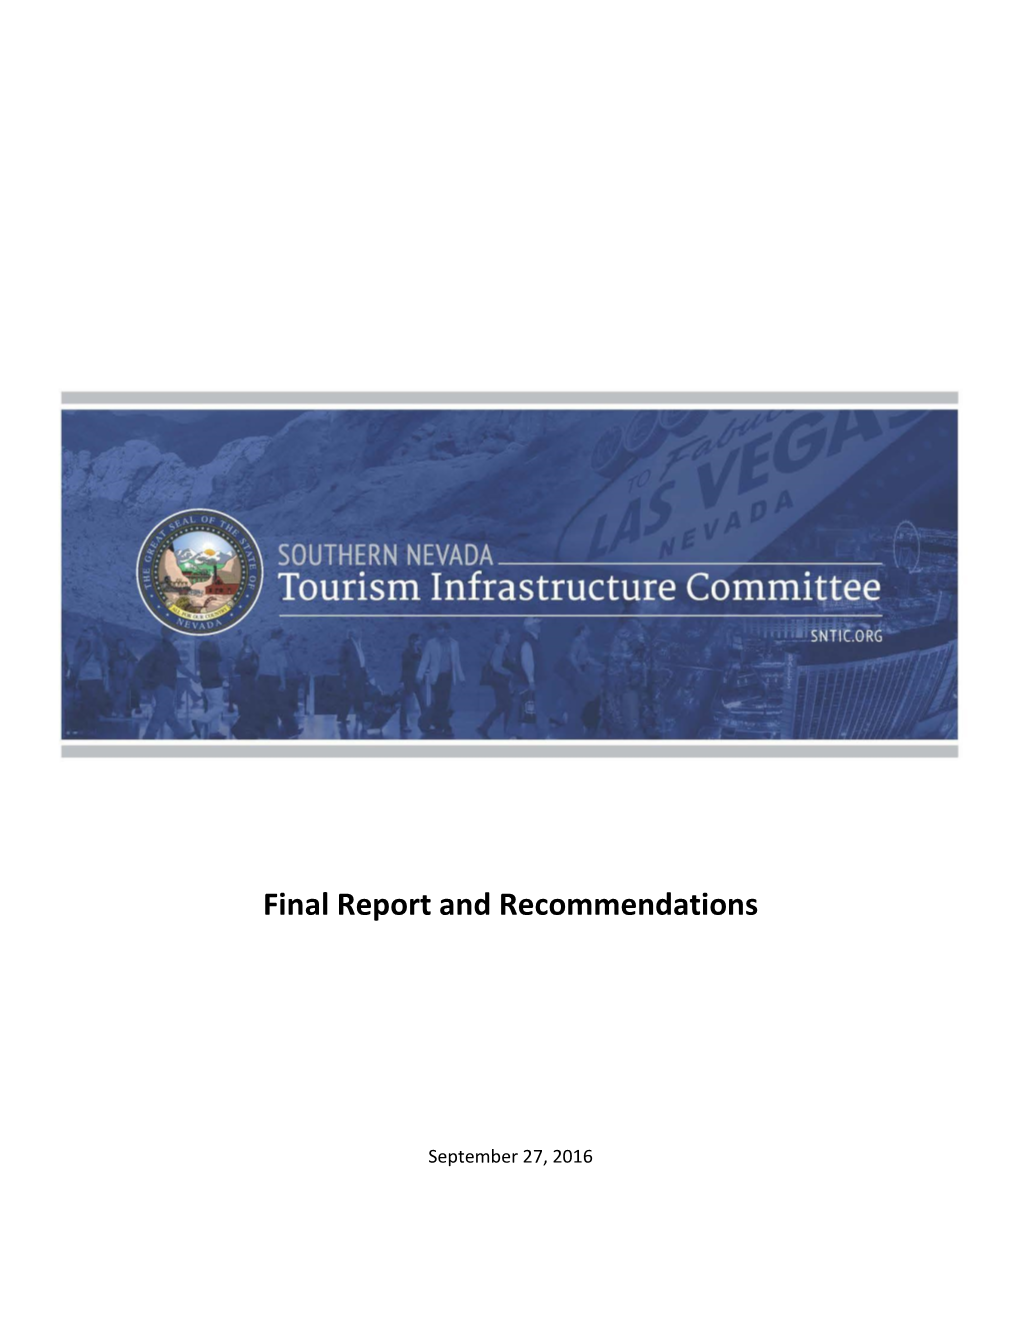 Final Report and Recommendations